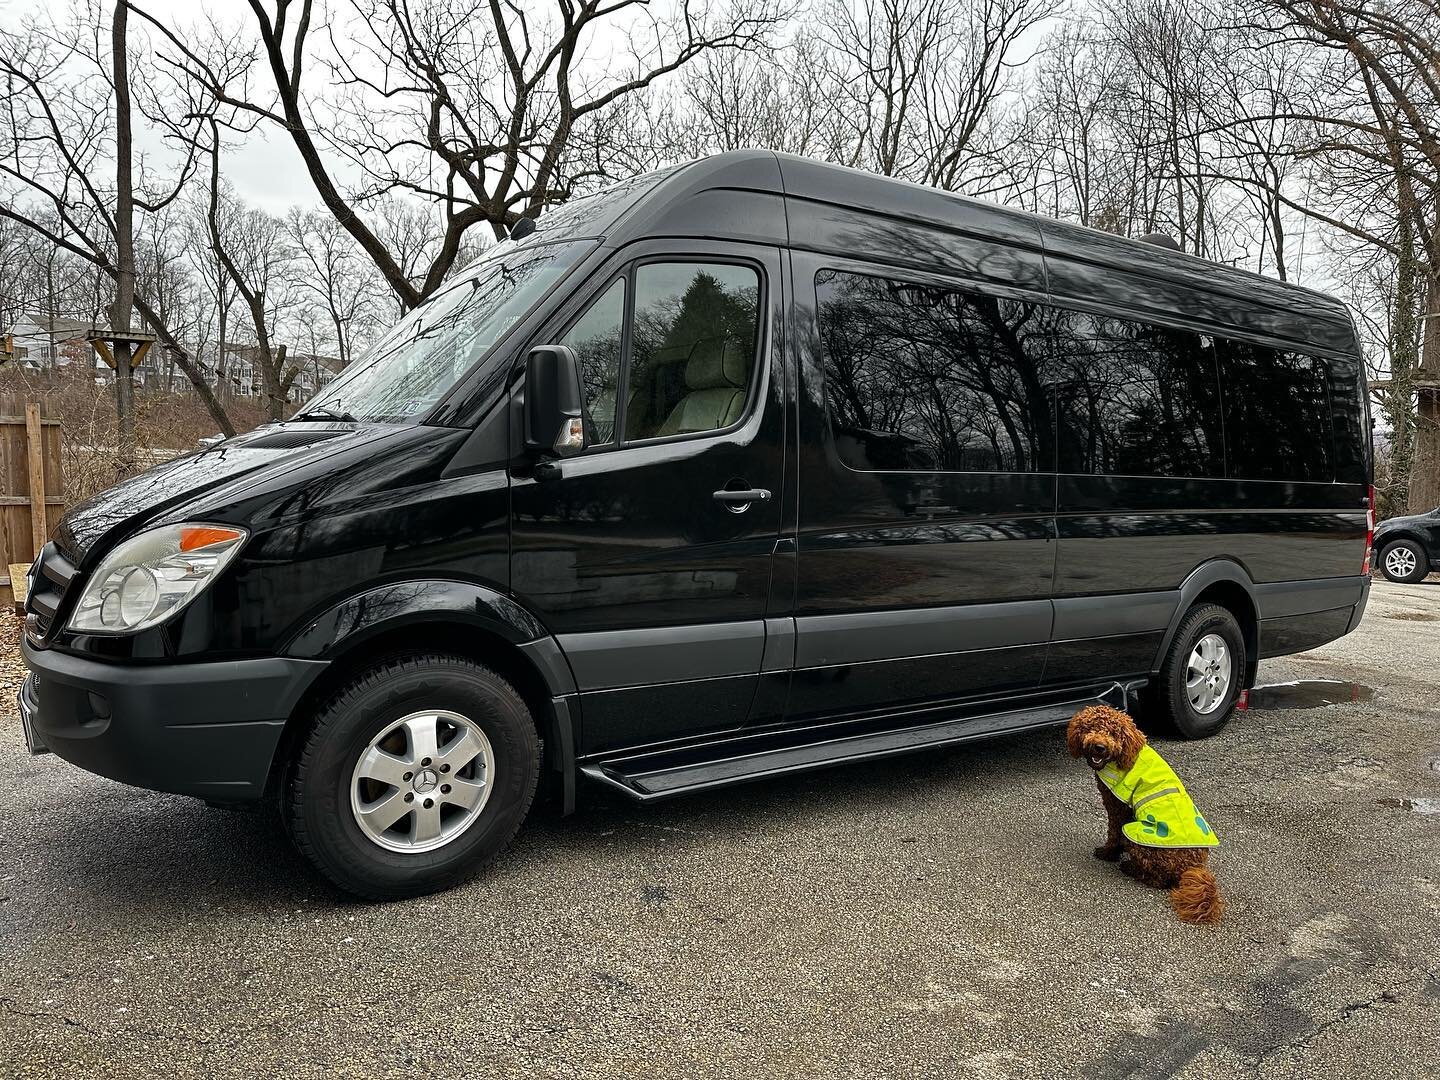 Big or small, we can do it all!

#directdetailingservices #mediapa #media #mainline #pa #delco #chestercountypa #car #wesrchester #montco #cars #carguy #carguystuff #windowtint #tinted #inprocess #demo #installation #auto #autodetailing #ppf